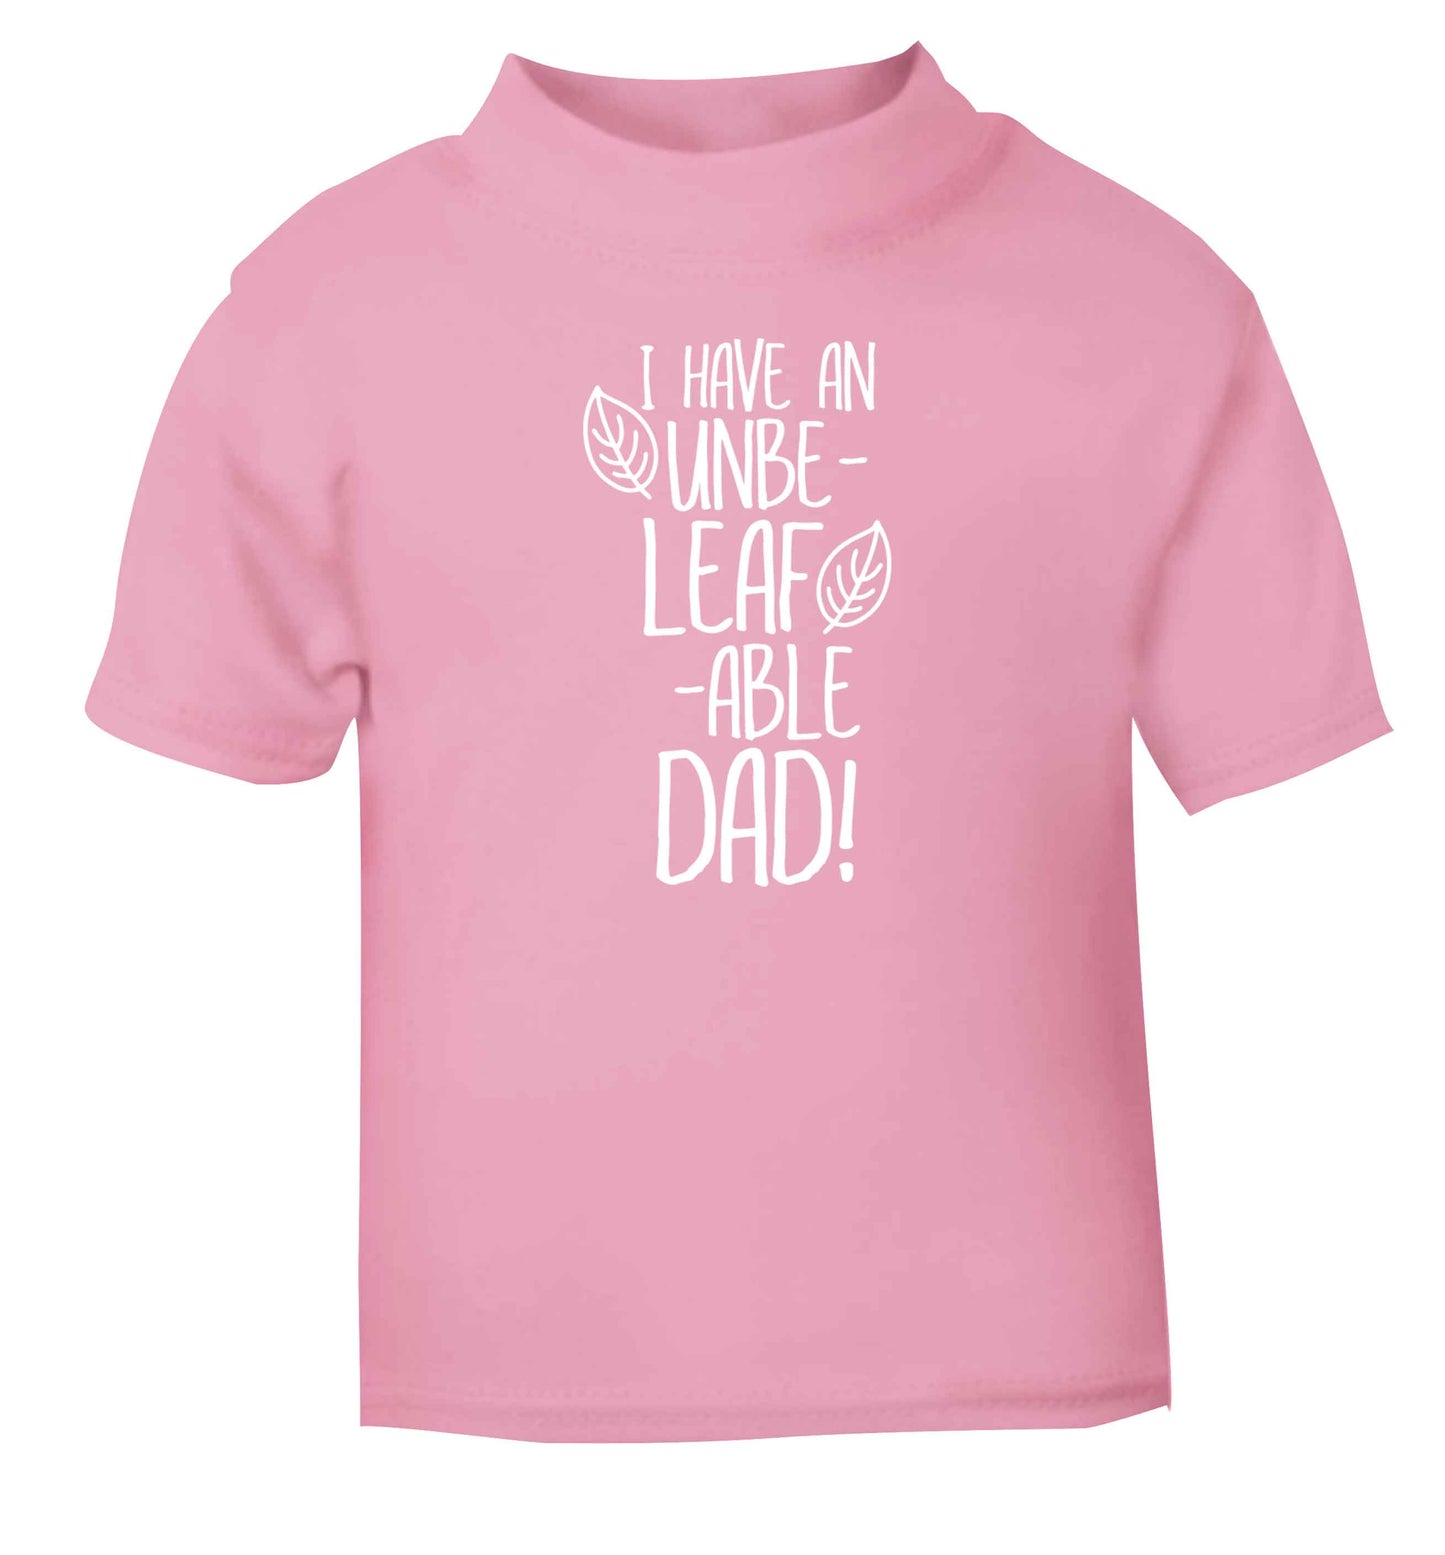 I have an unbe-leaf-able dad light pink Baby Toddler Tshirt 2 Years